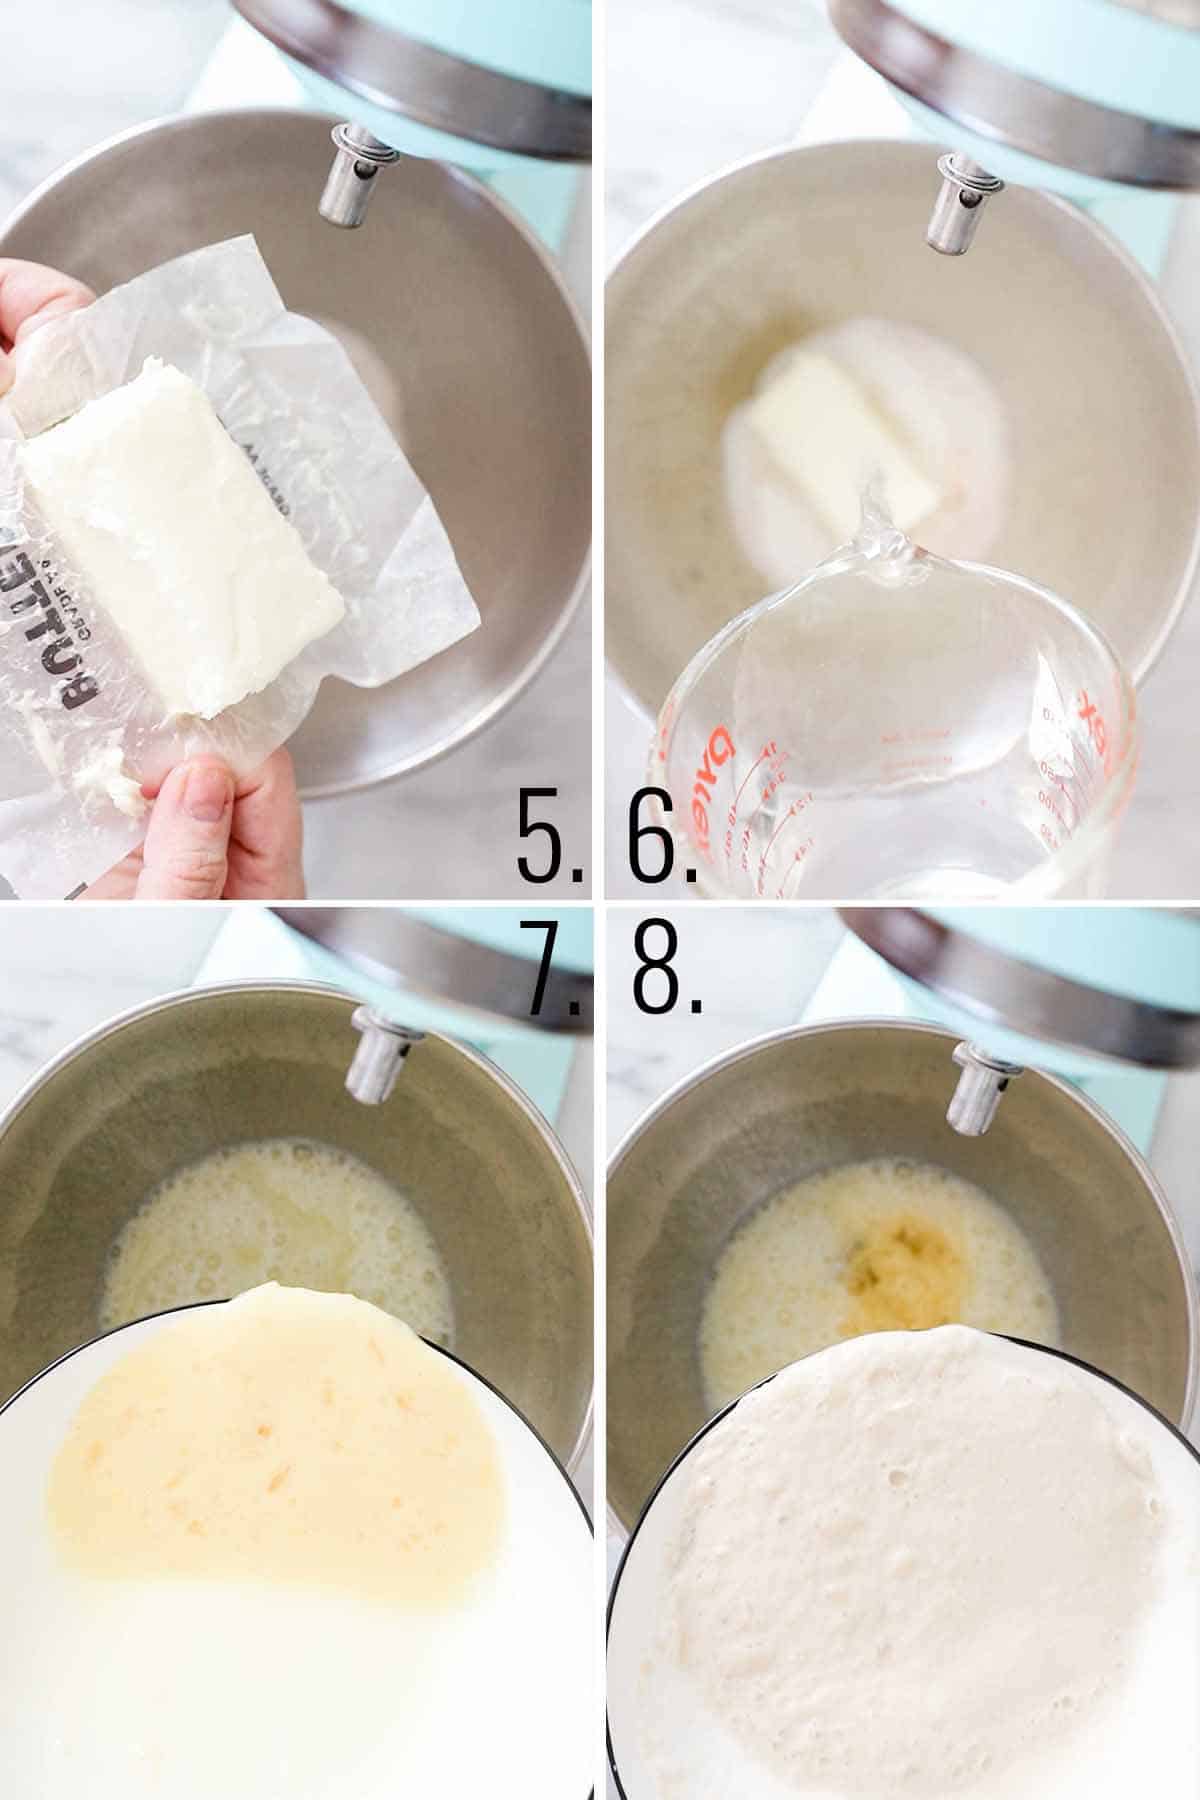 Crescent roll recipe dough being made in a kitchenmaid mixer.